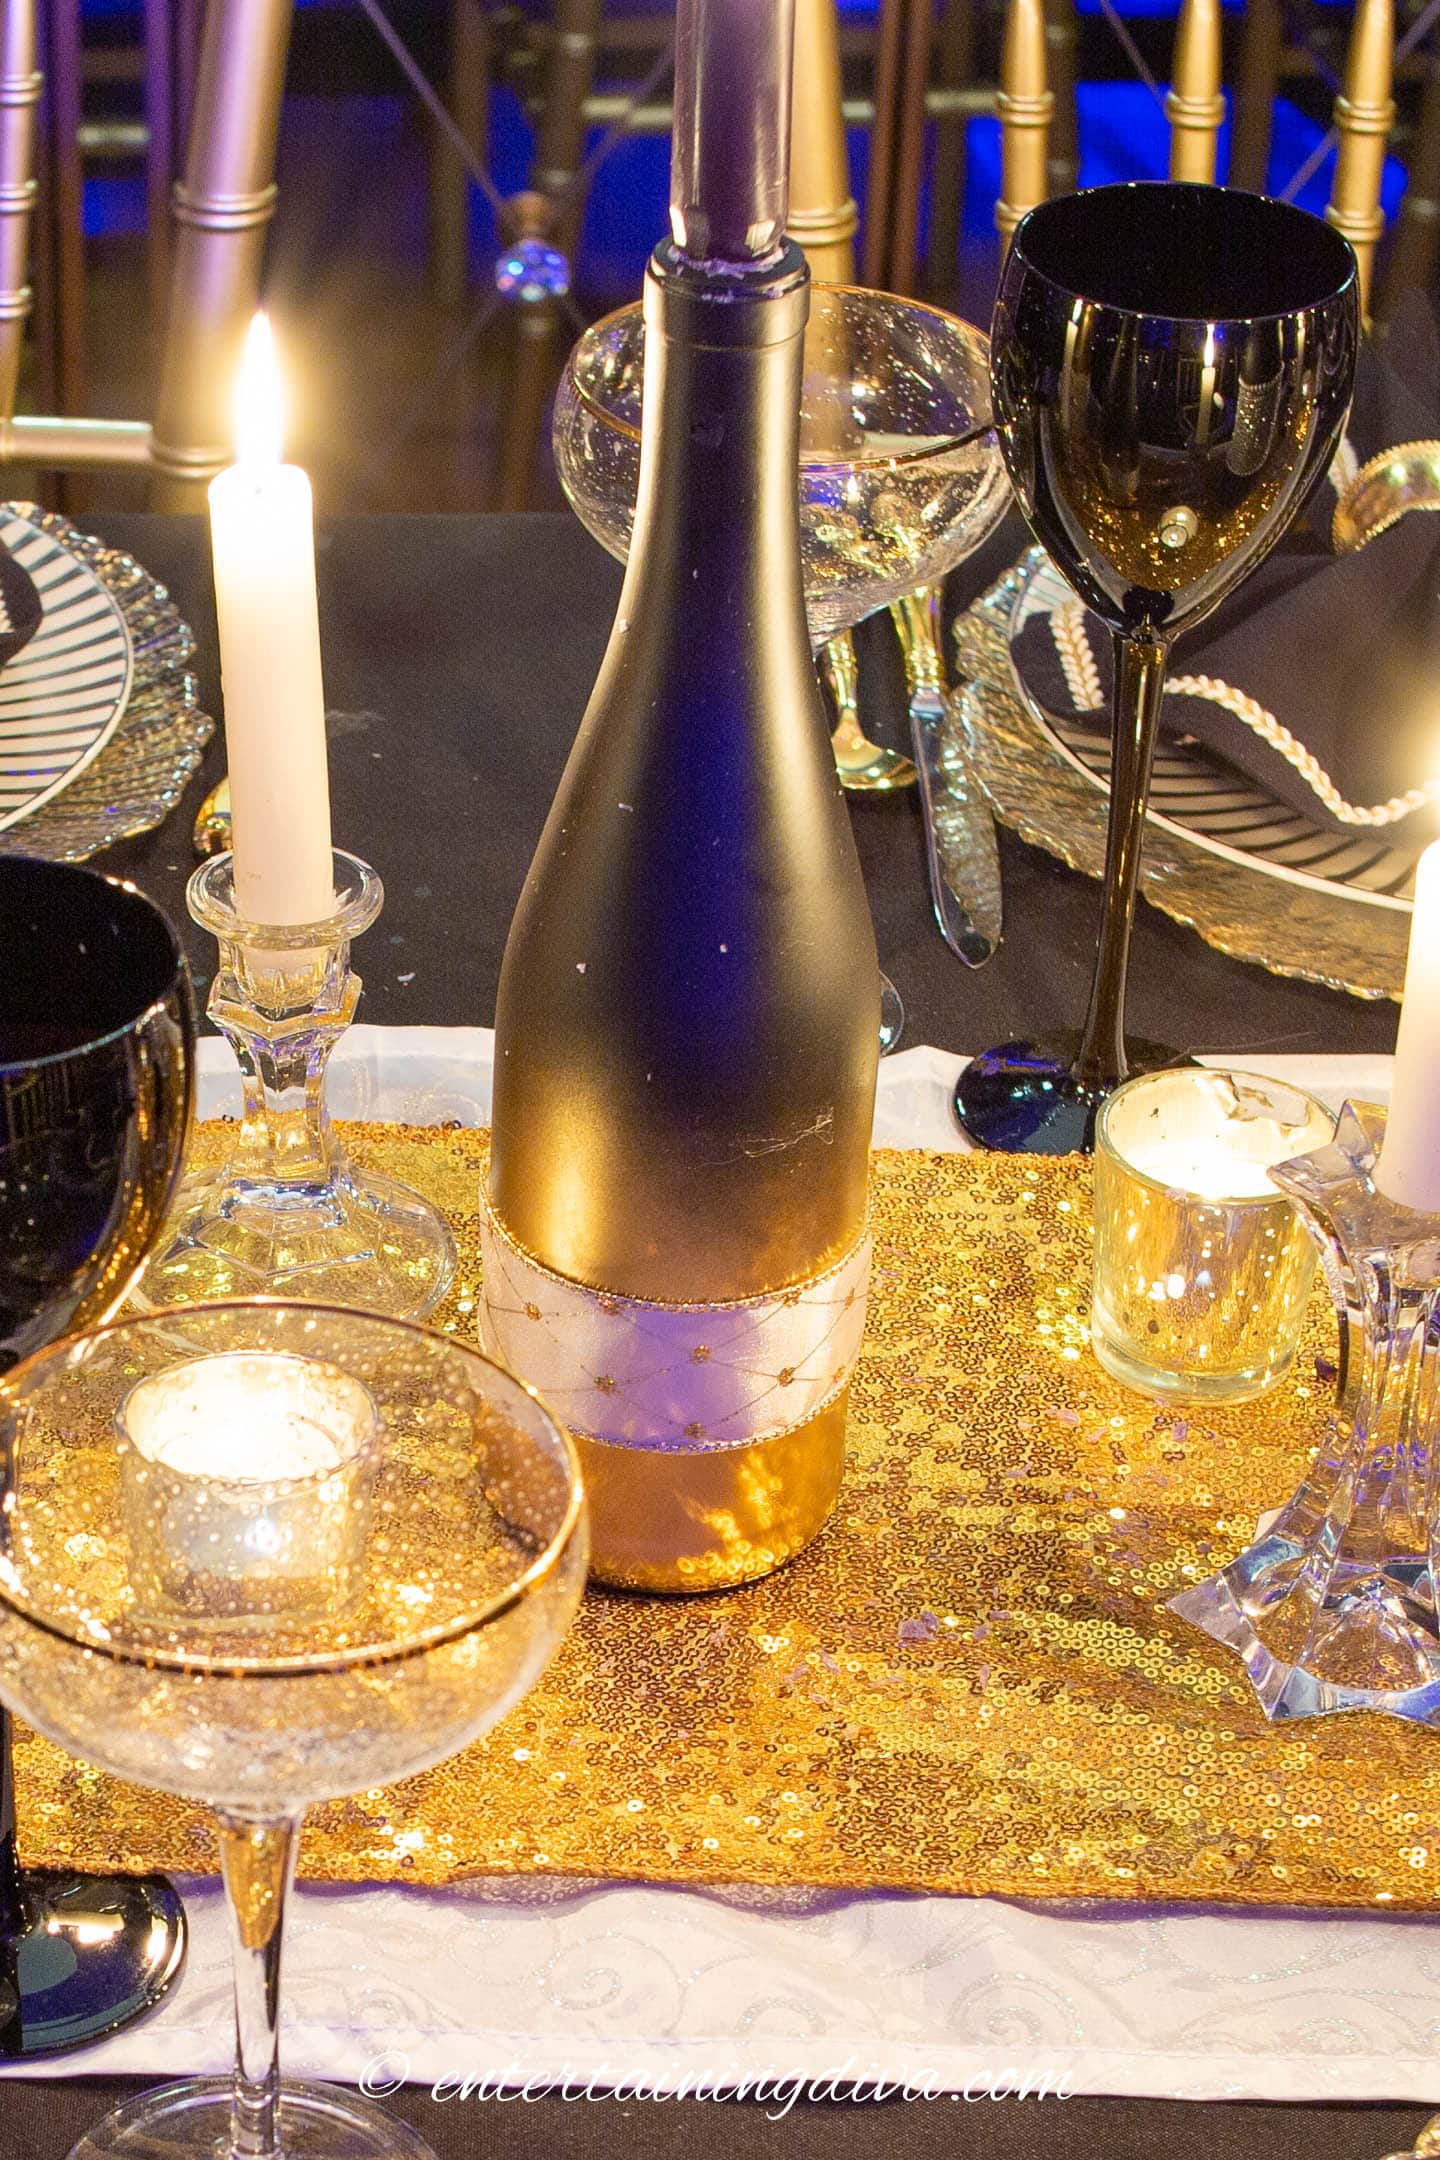 A black and gold wine bottle used as a candleholder in a black and gold table centerpiece